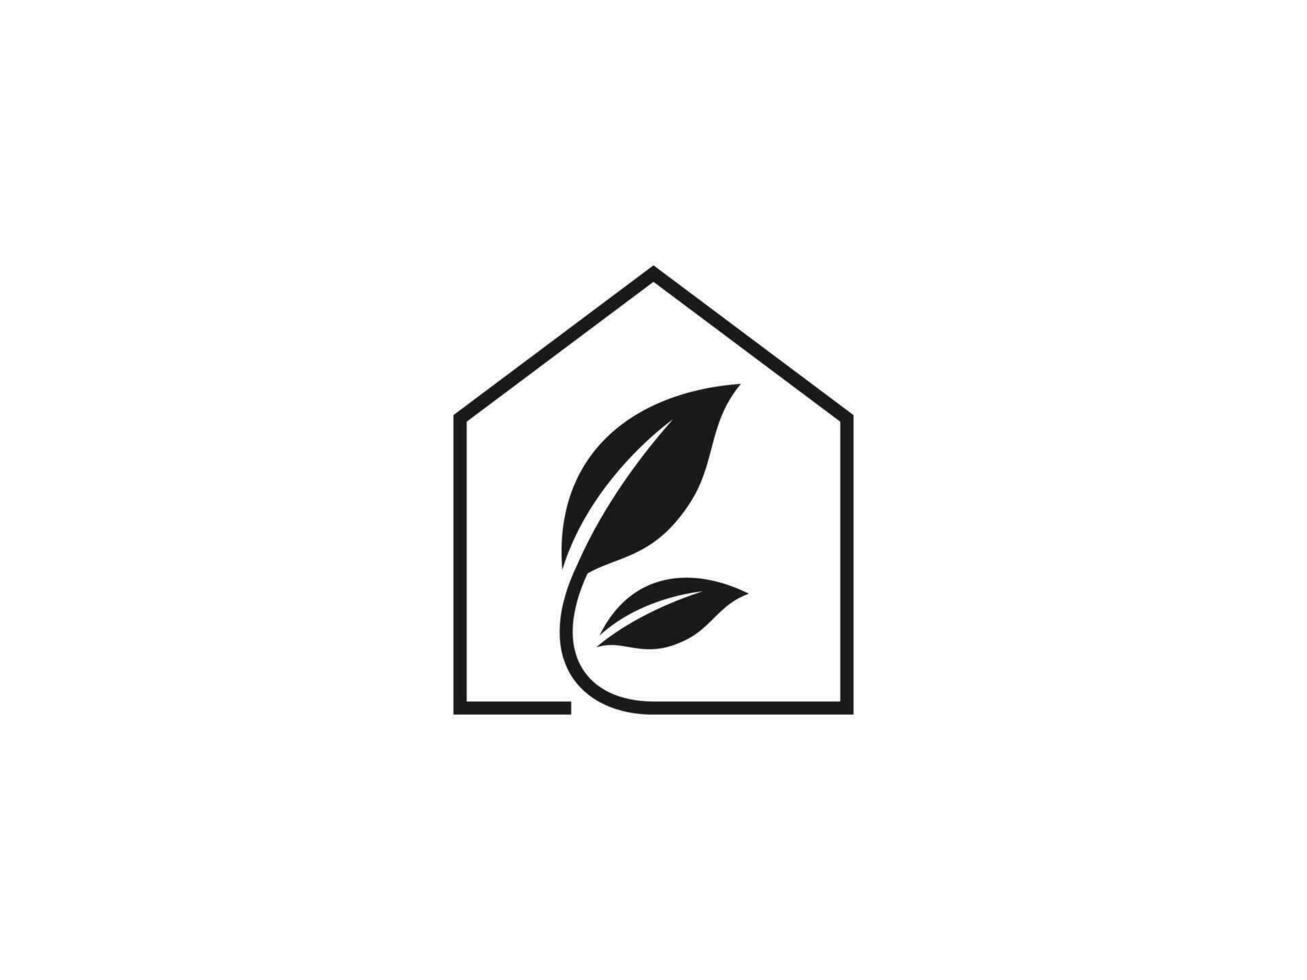 nature house logo vector illustration. leaf house vector icon